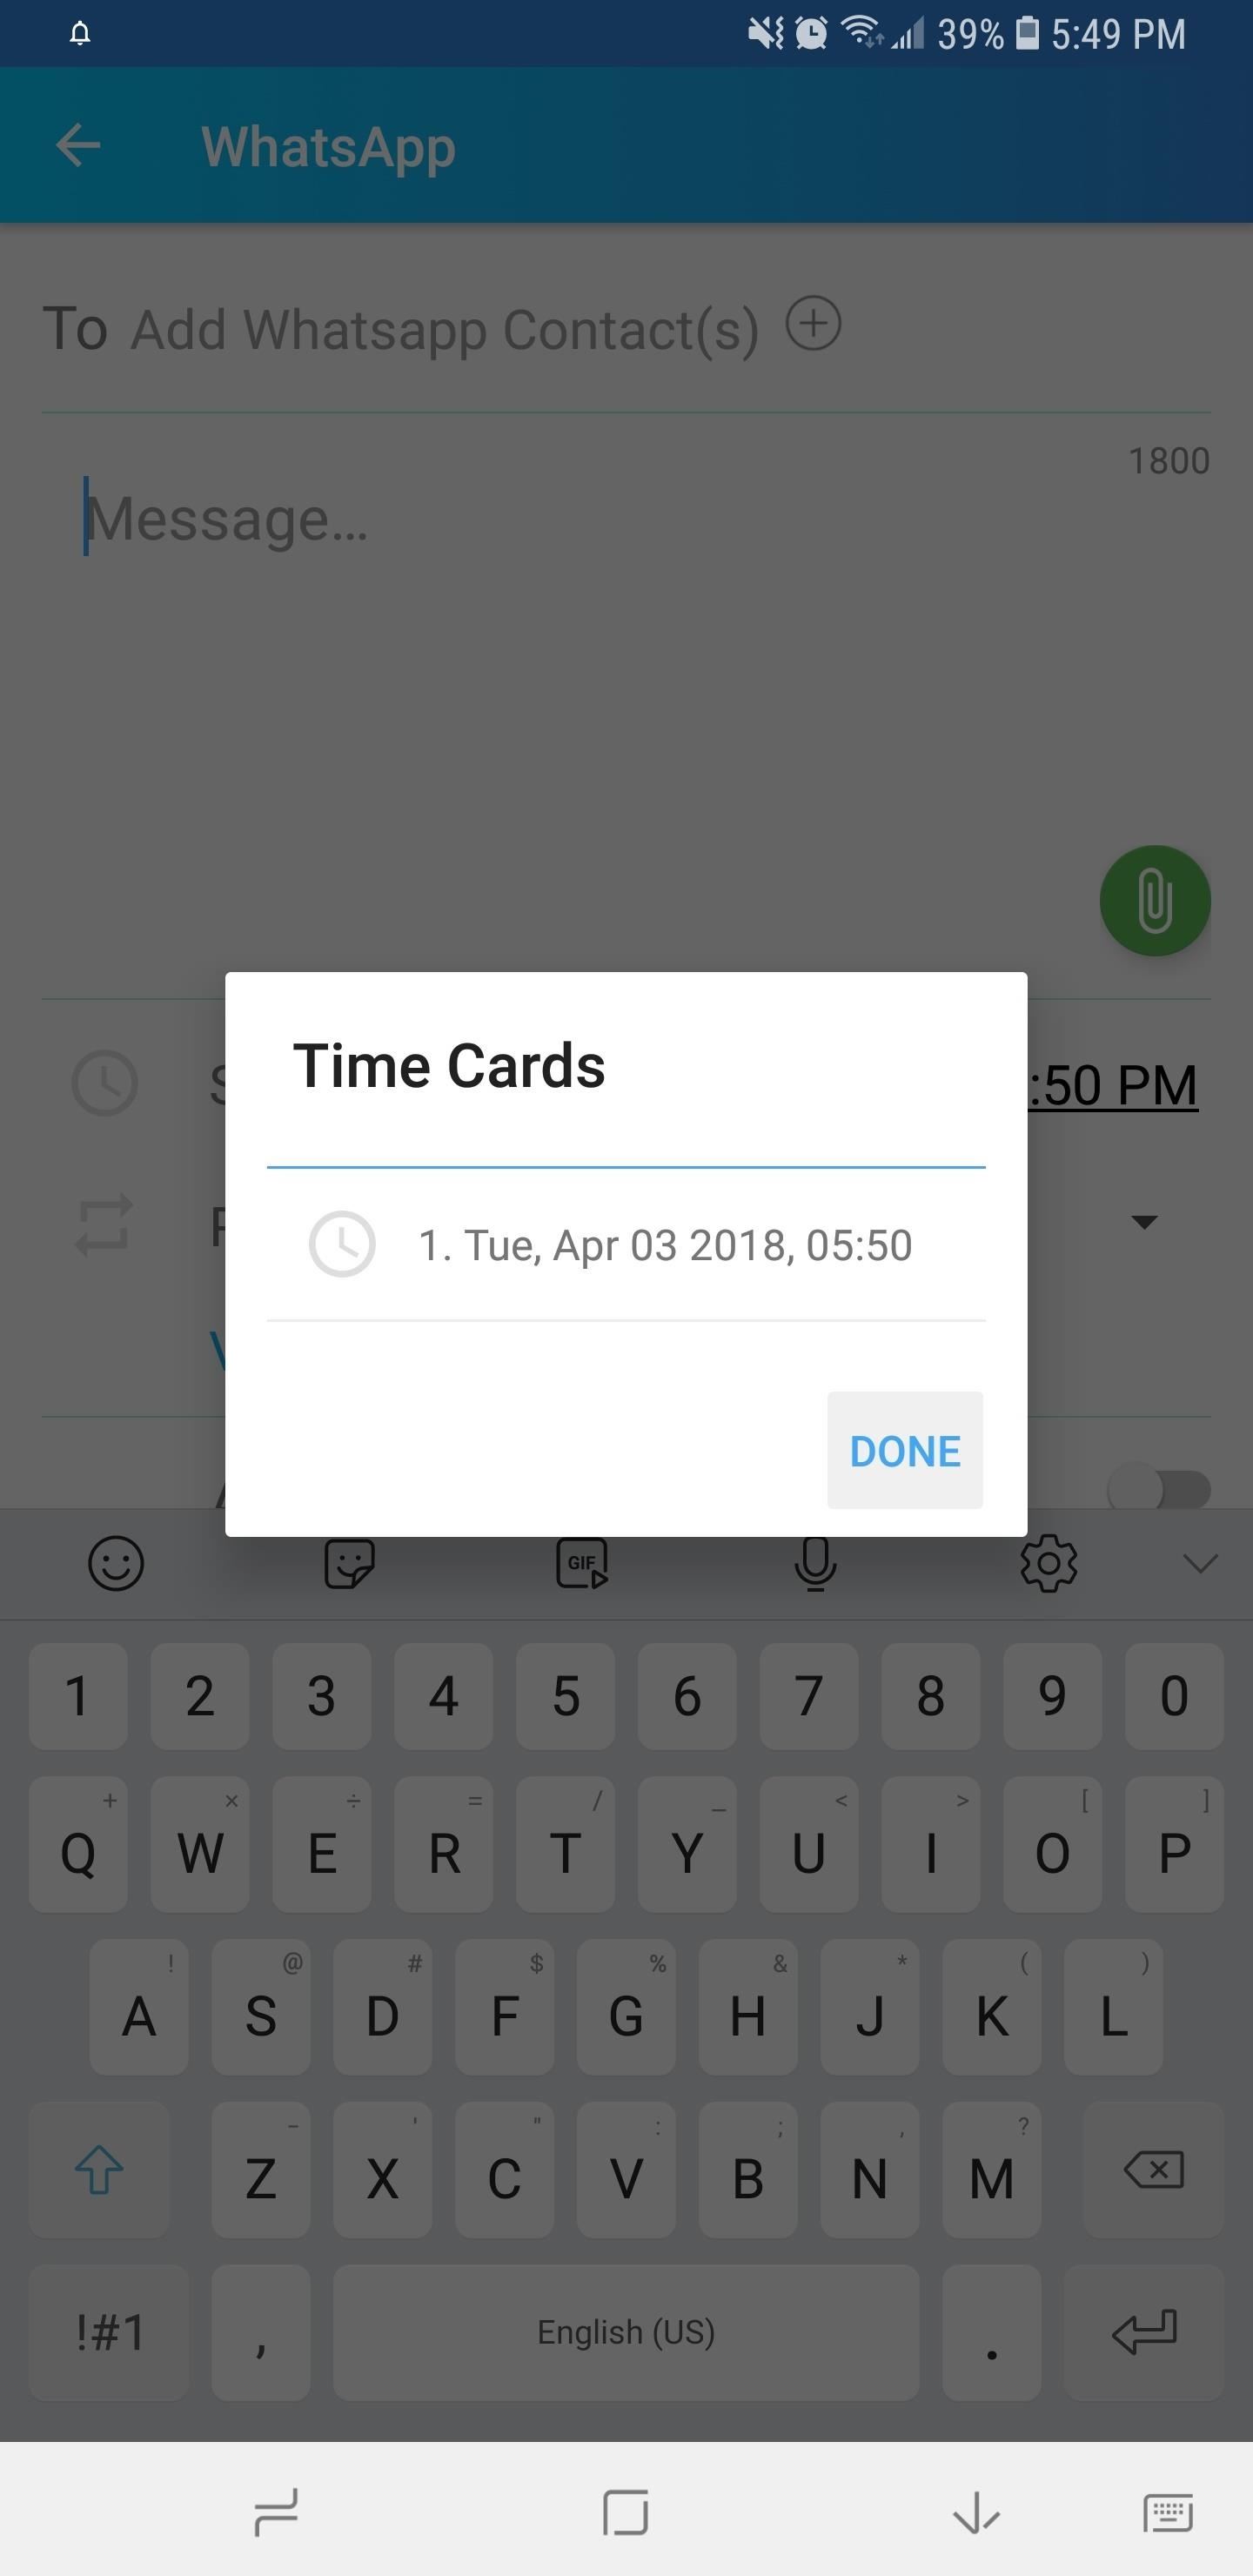 Hacking WhatsApp: How to Schedule Messages to Send Automatically